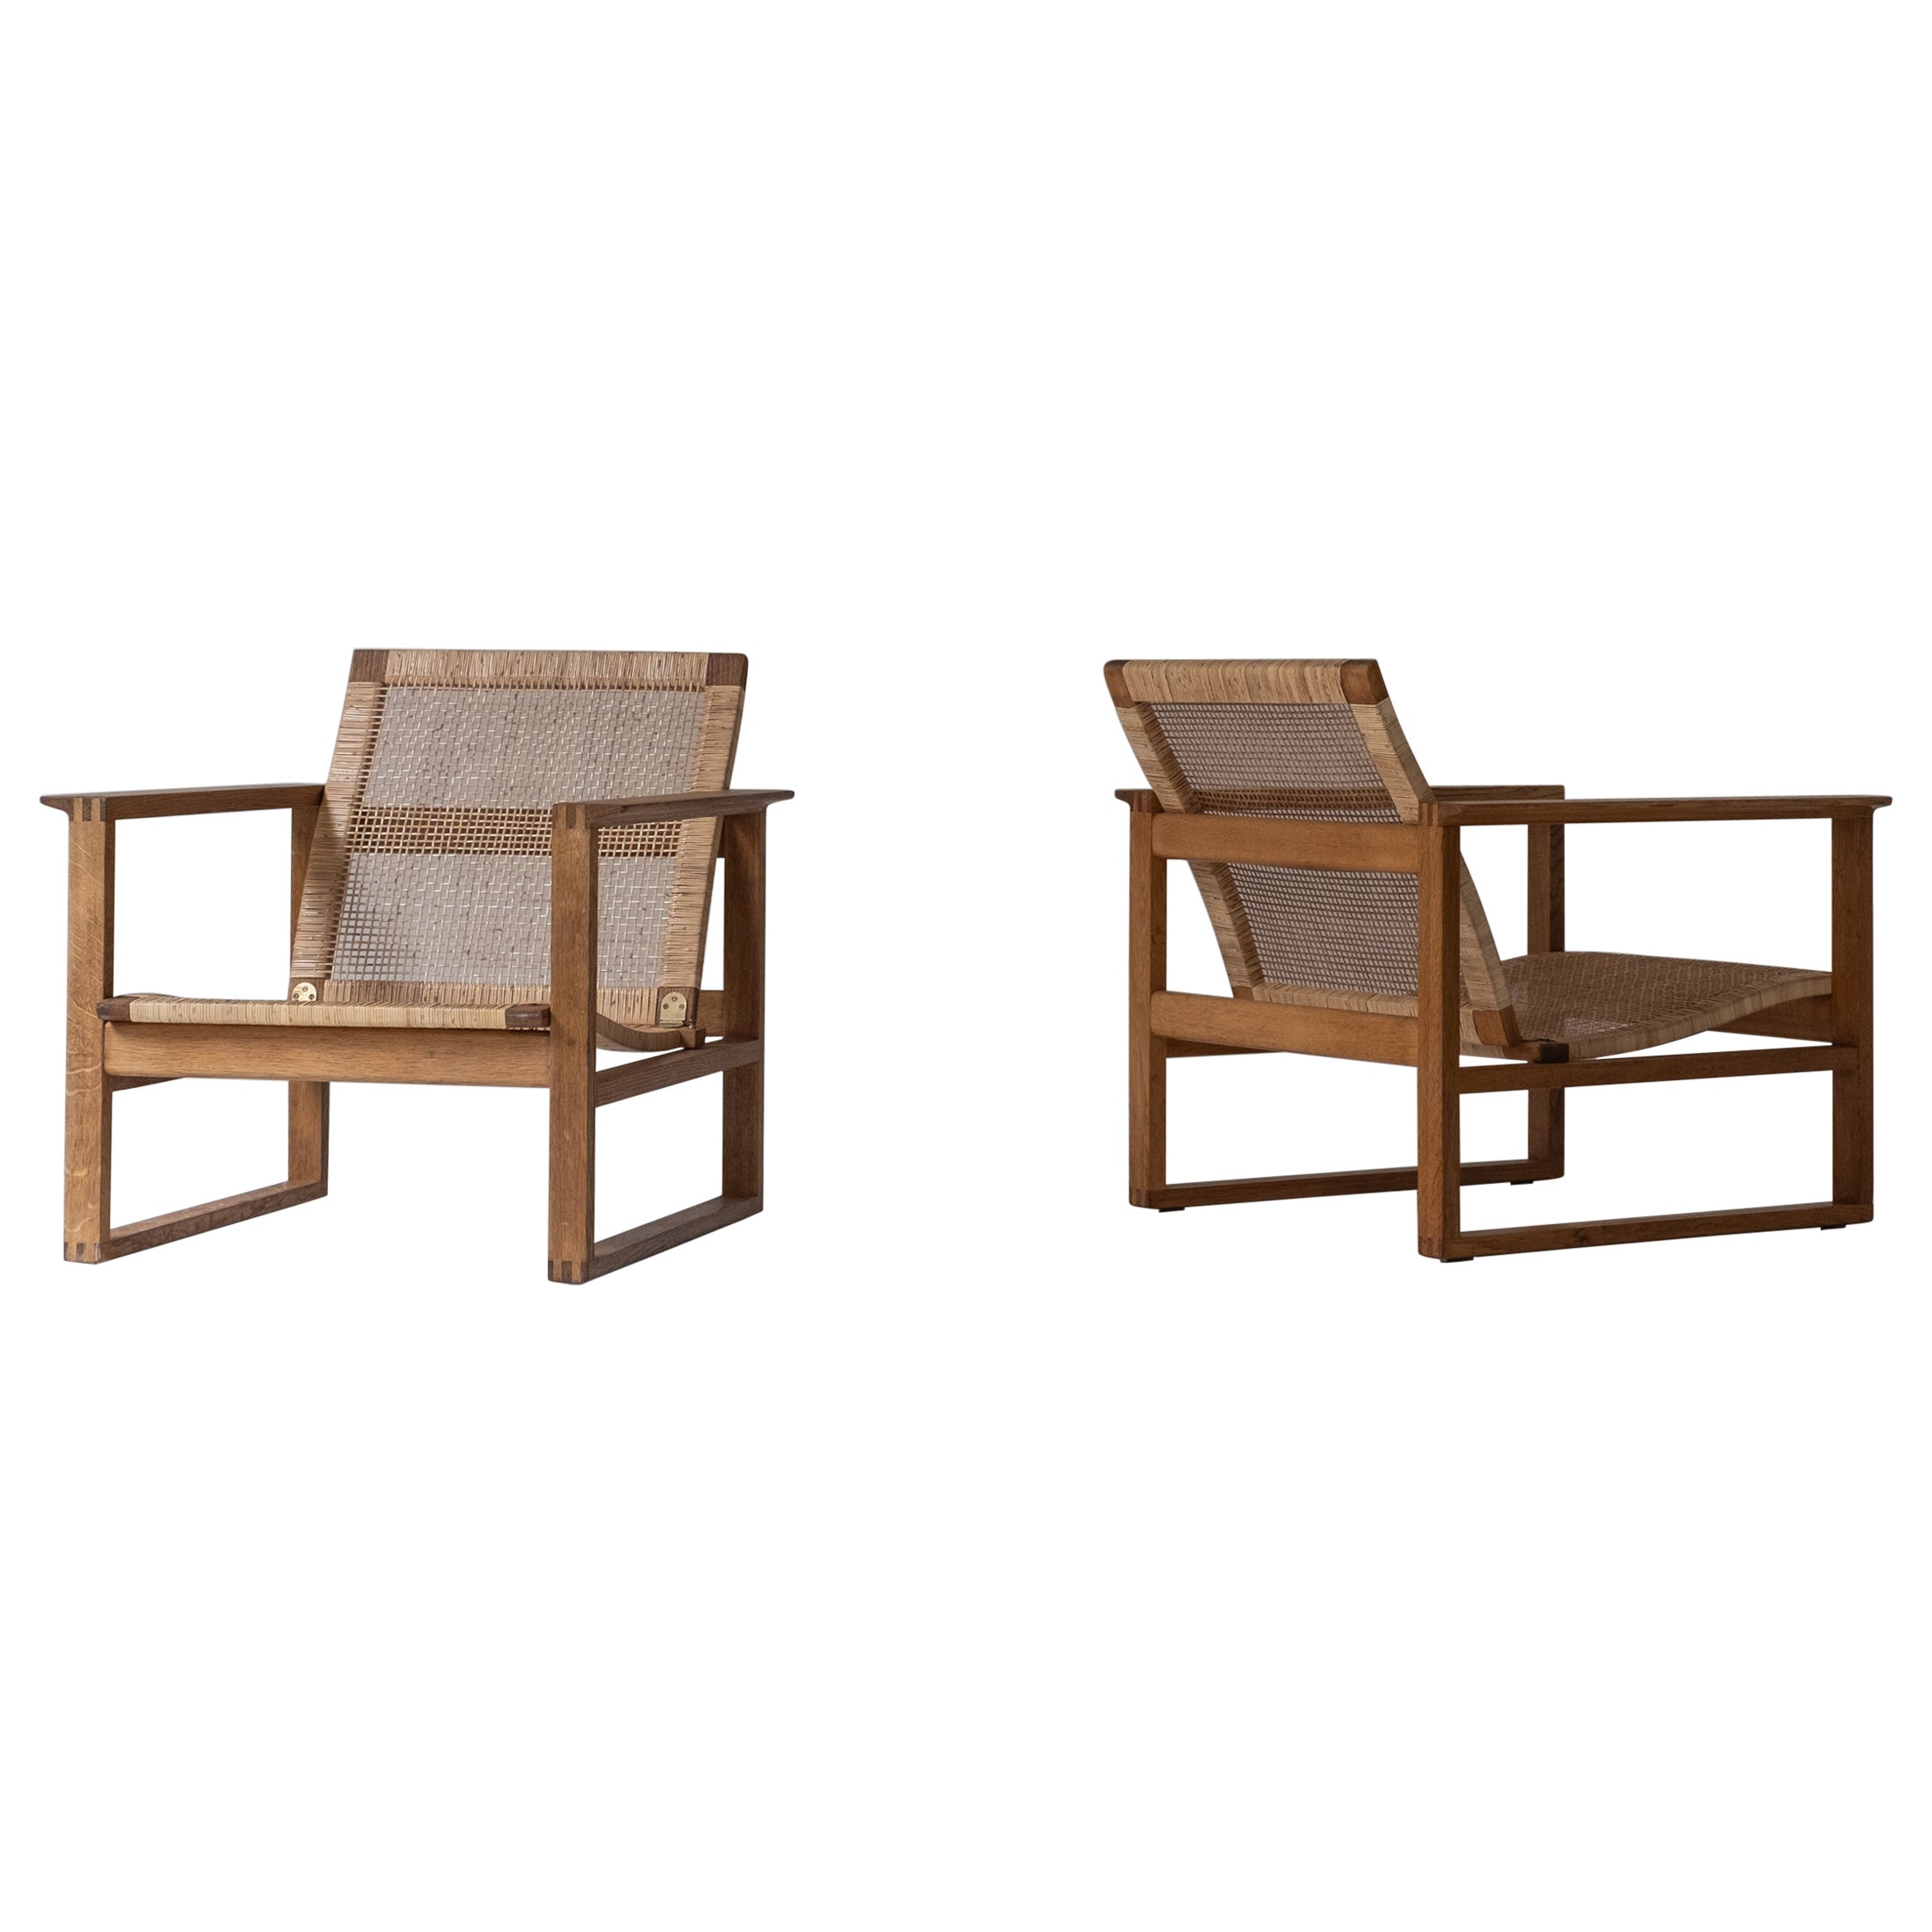 Set of two model 2256 easy chairs by Børge Mogensen for Fredericia, Denmark 1956